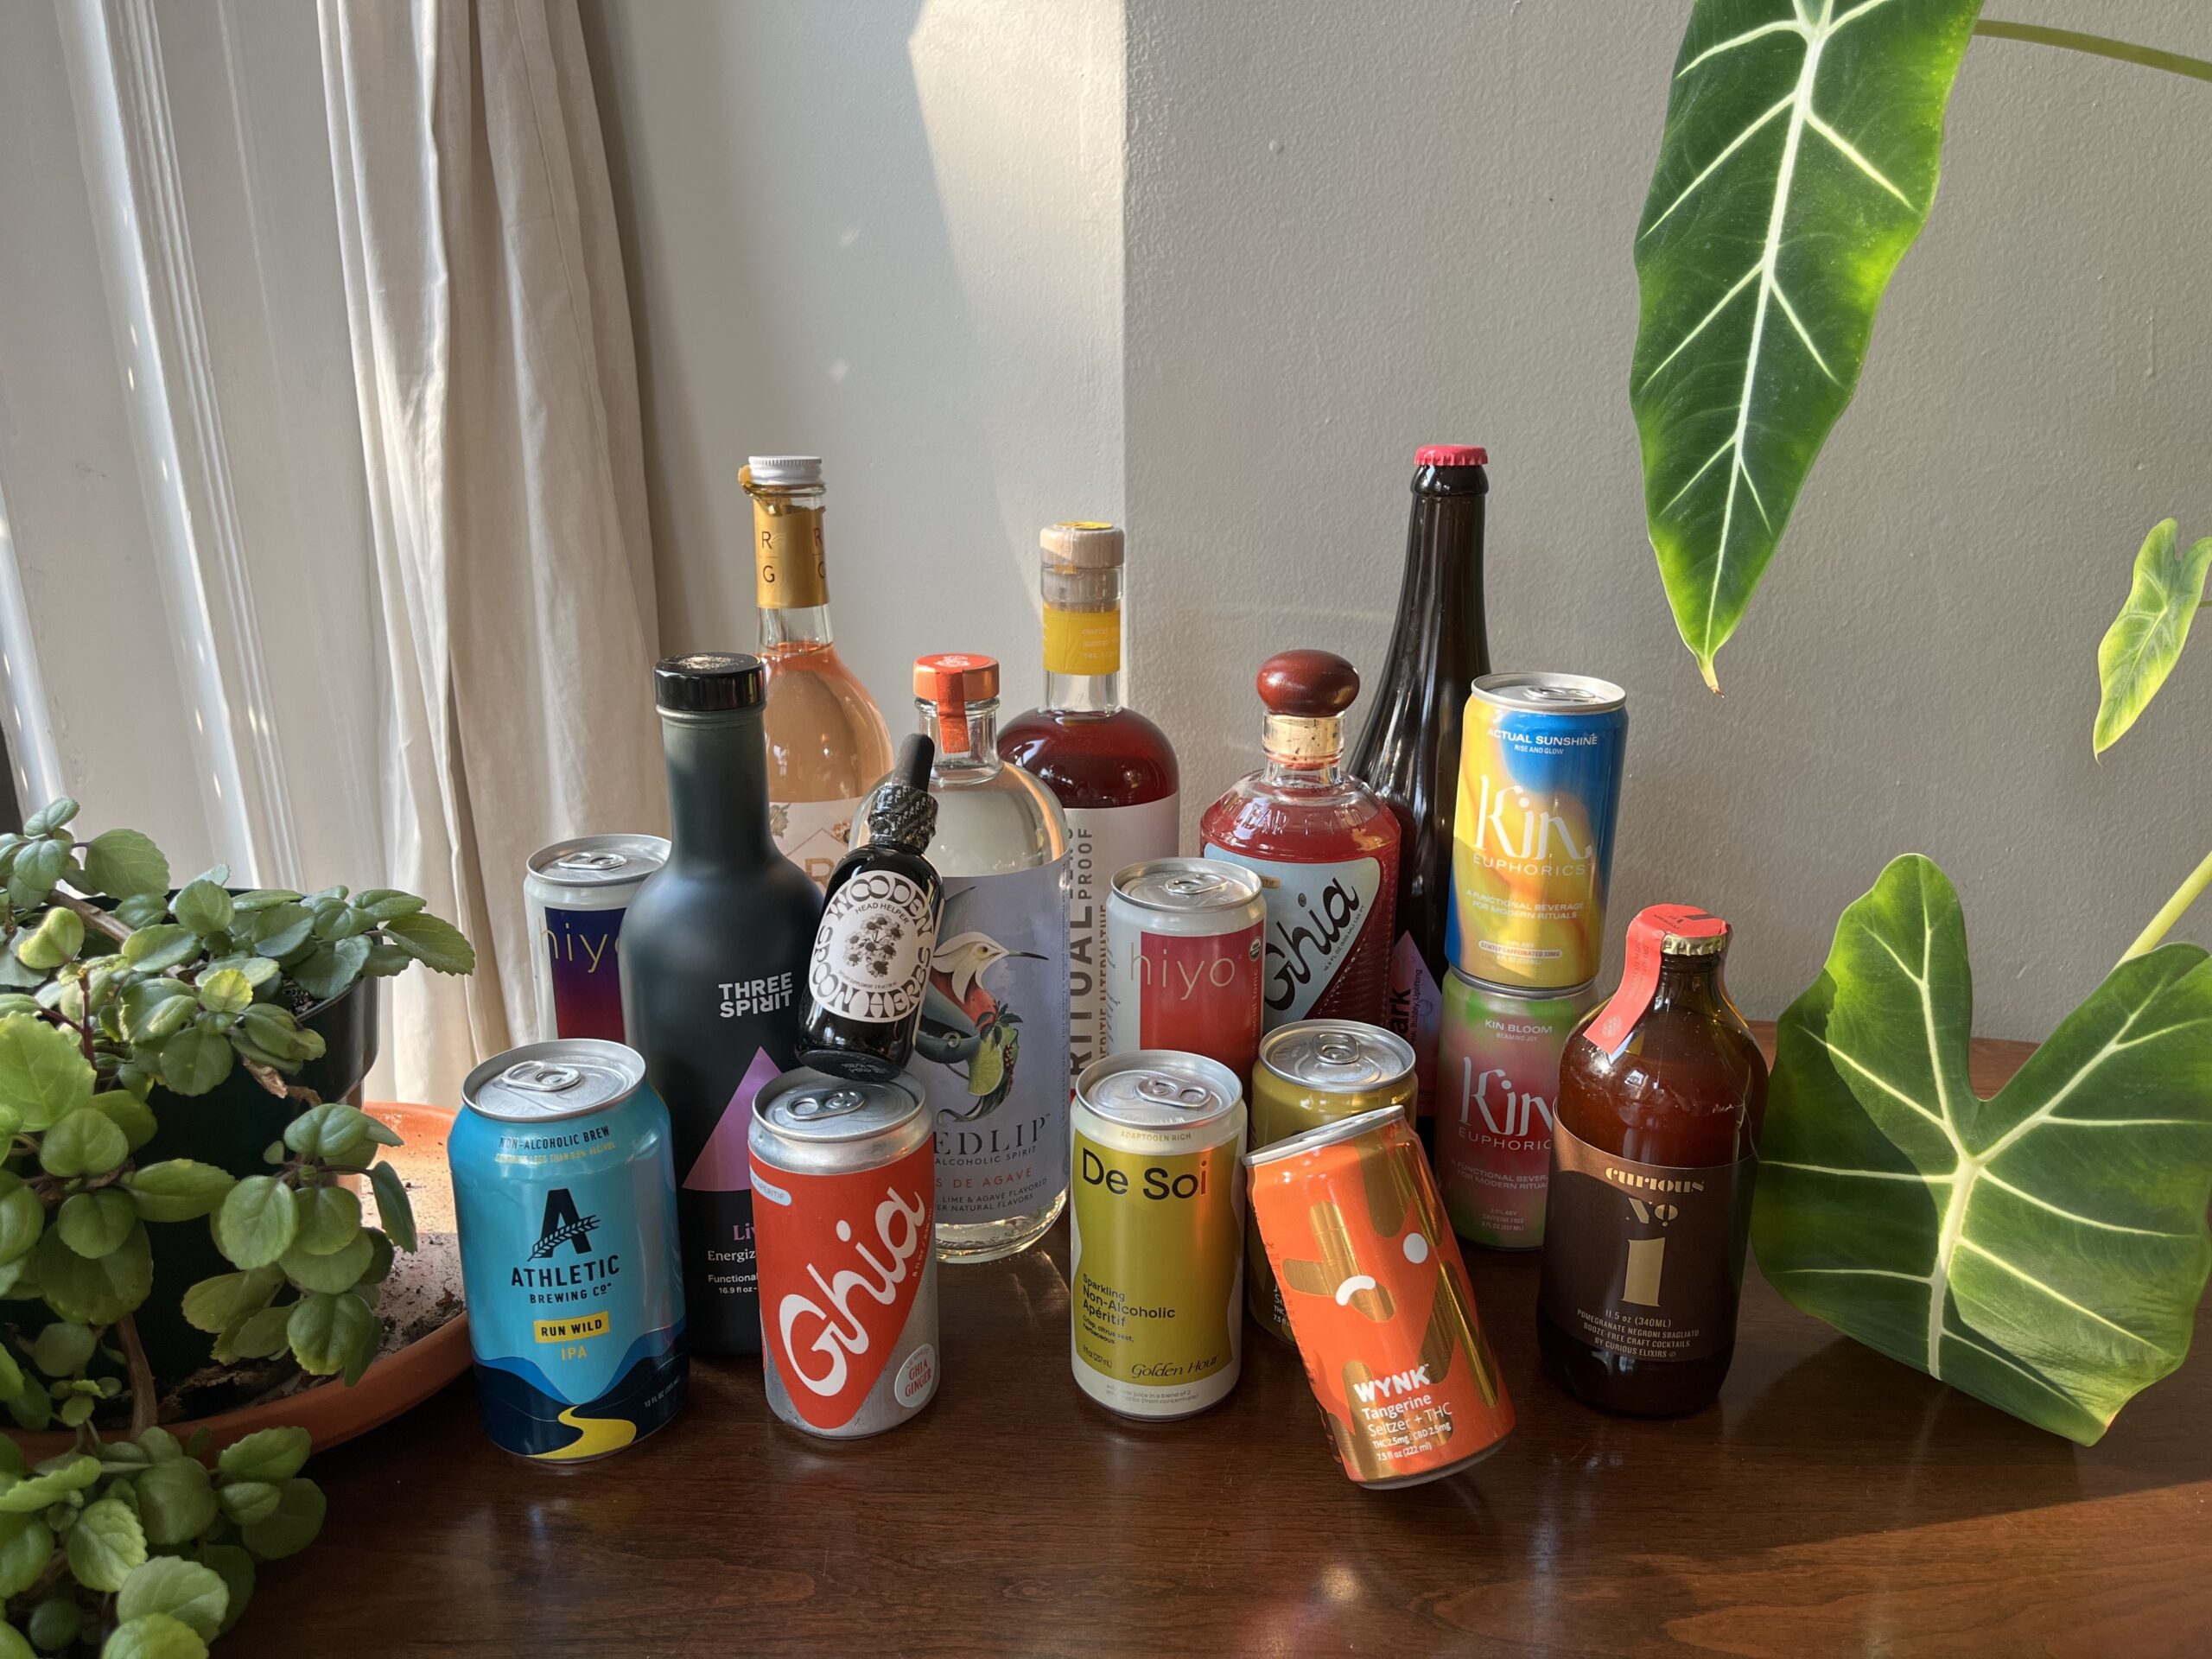 A variety of non-alcoholic beverages, including bottles and cans, displayed on a wooden surface near potted plants and a sunlit window.